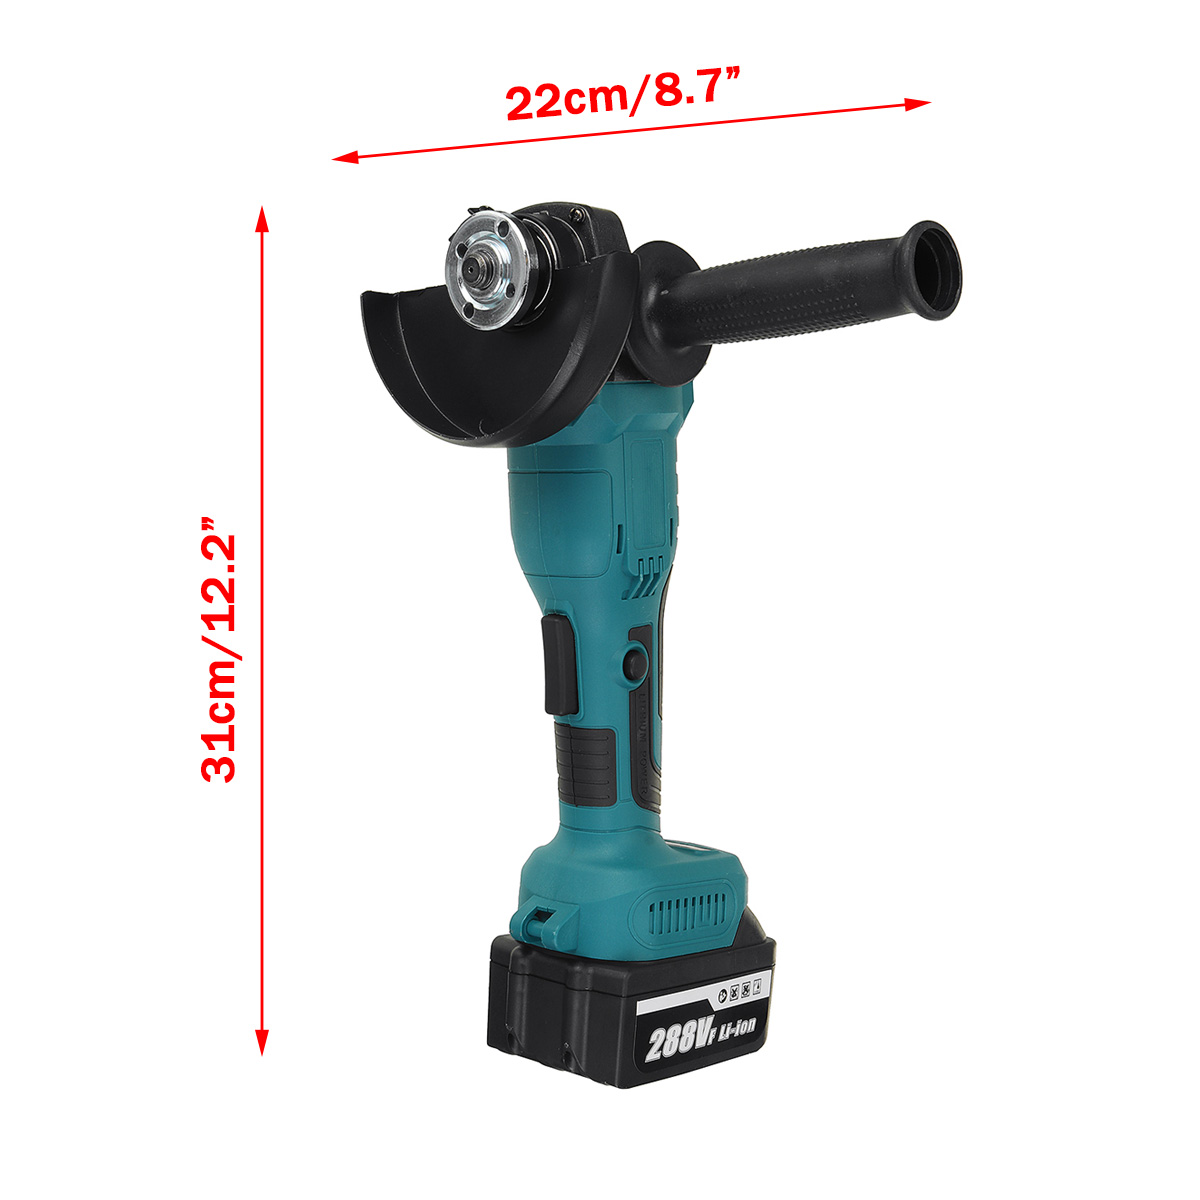 100125mm-Brushless-Cordless-Angle-Grinder-Polisher-Cutting-Tool-W-None12-Battery-For-Makiita-1867833-6